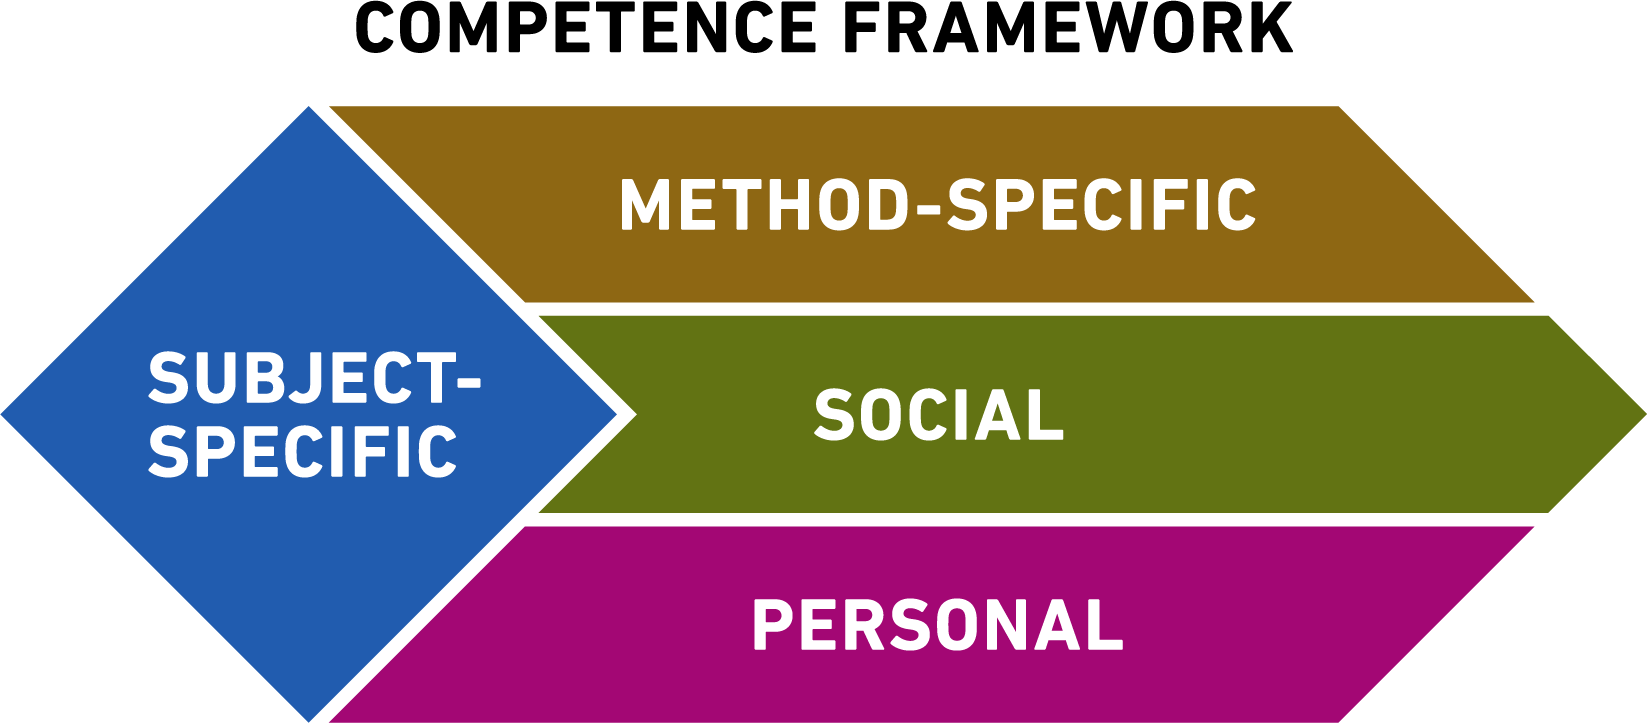 Graphical representation of the ETH Competence Framework. The framework is represented in the shape of a diamond, with core subject-specific competencies, supported by three transferable competence domains. These are method-specific, social, and personal competencies. All four competence domains are displayed in a different colour.